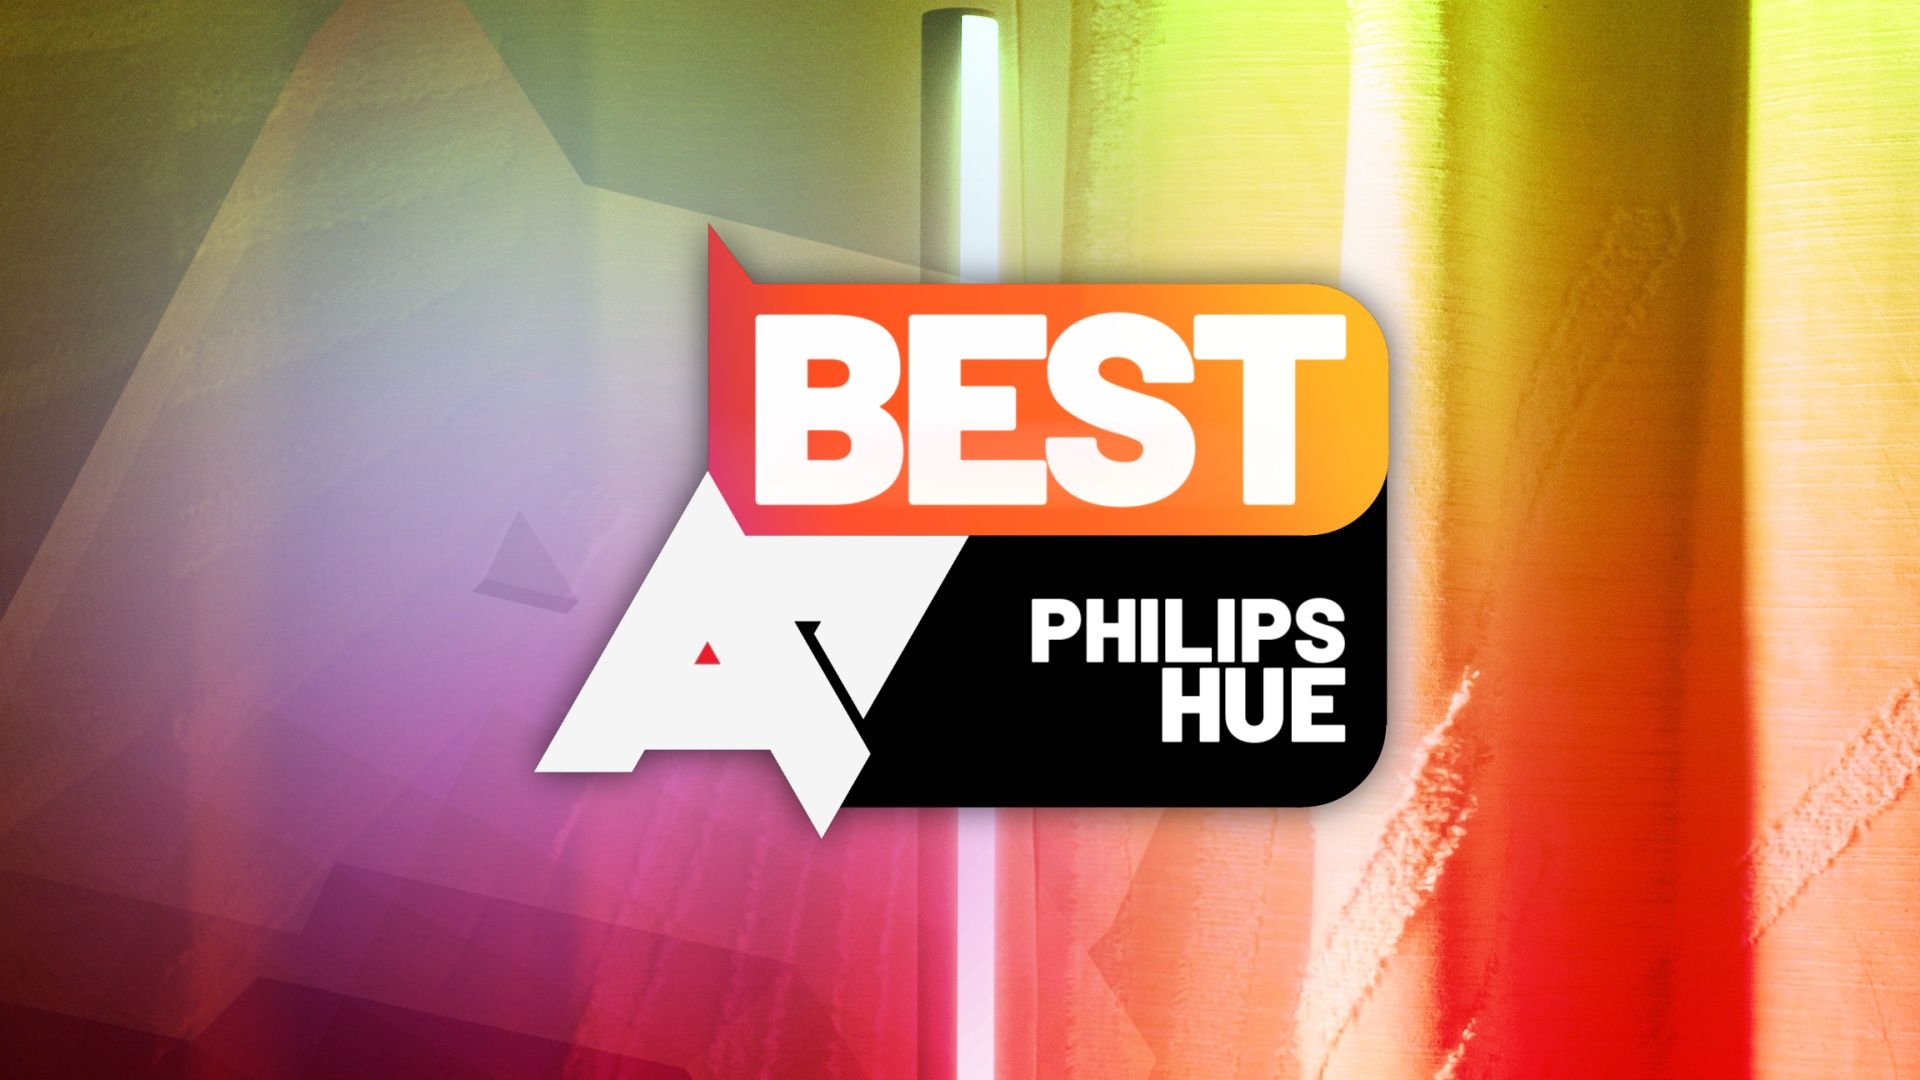 An image of a smart LED strip light with an 'AP Best Philips Hue' logo on top